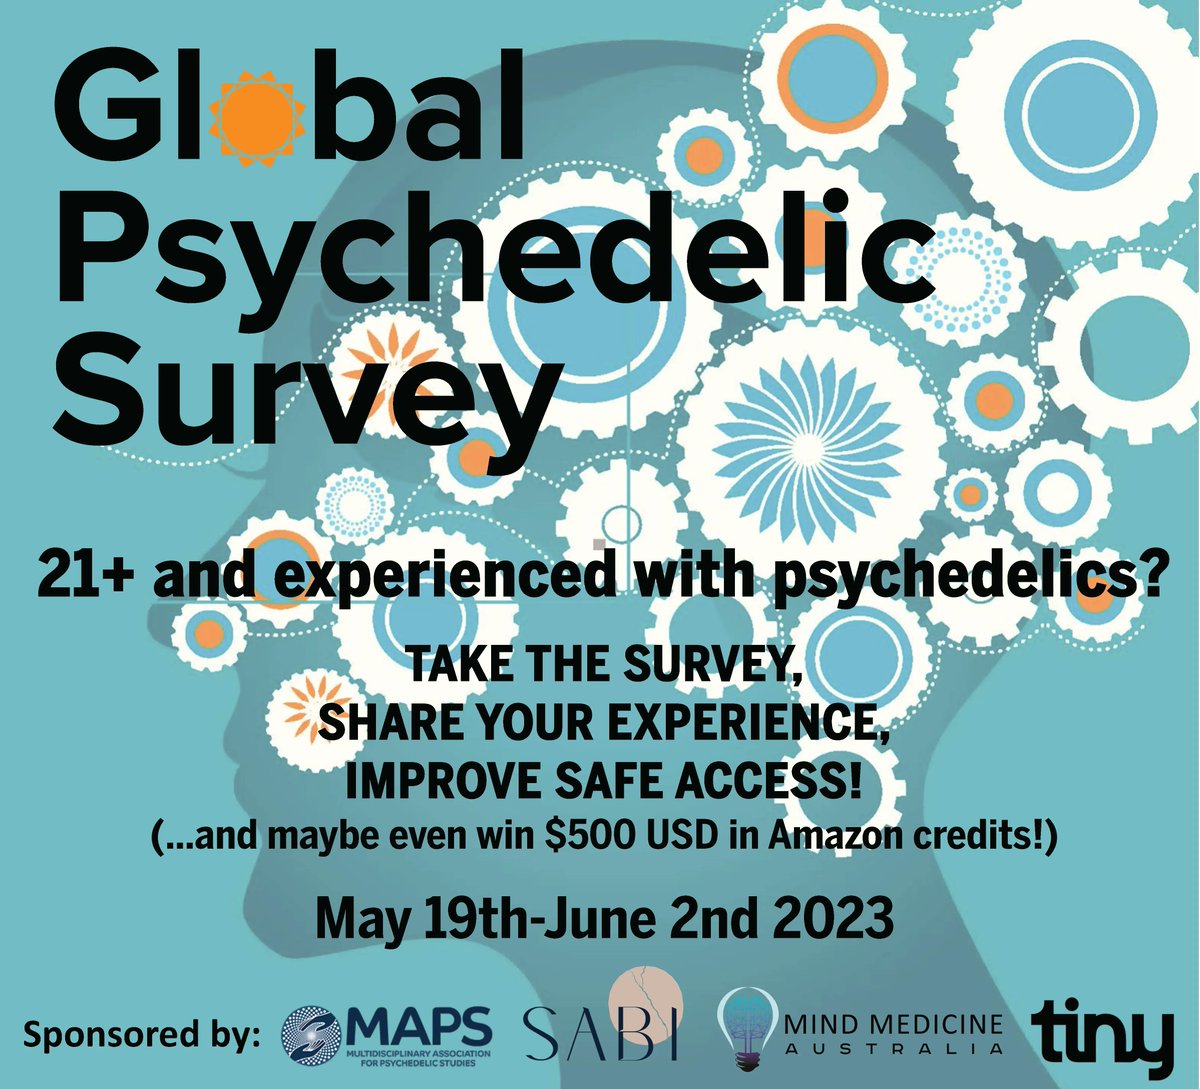 2/2 The survey will only be available online from May 19th - June 2nd, 2023. Take the survey and enter to win the giveaway: buff.ly/3obRvHj @MAPS @SabiMind @mindmedicineAU